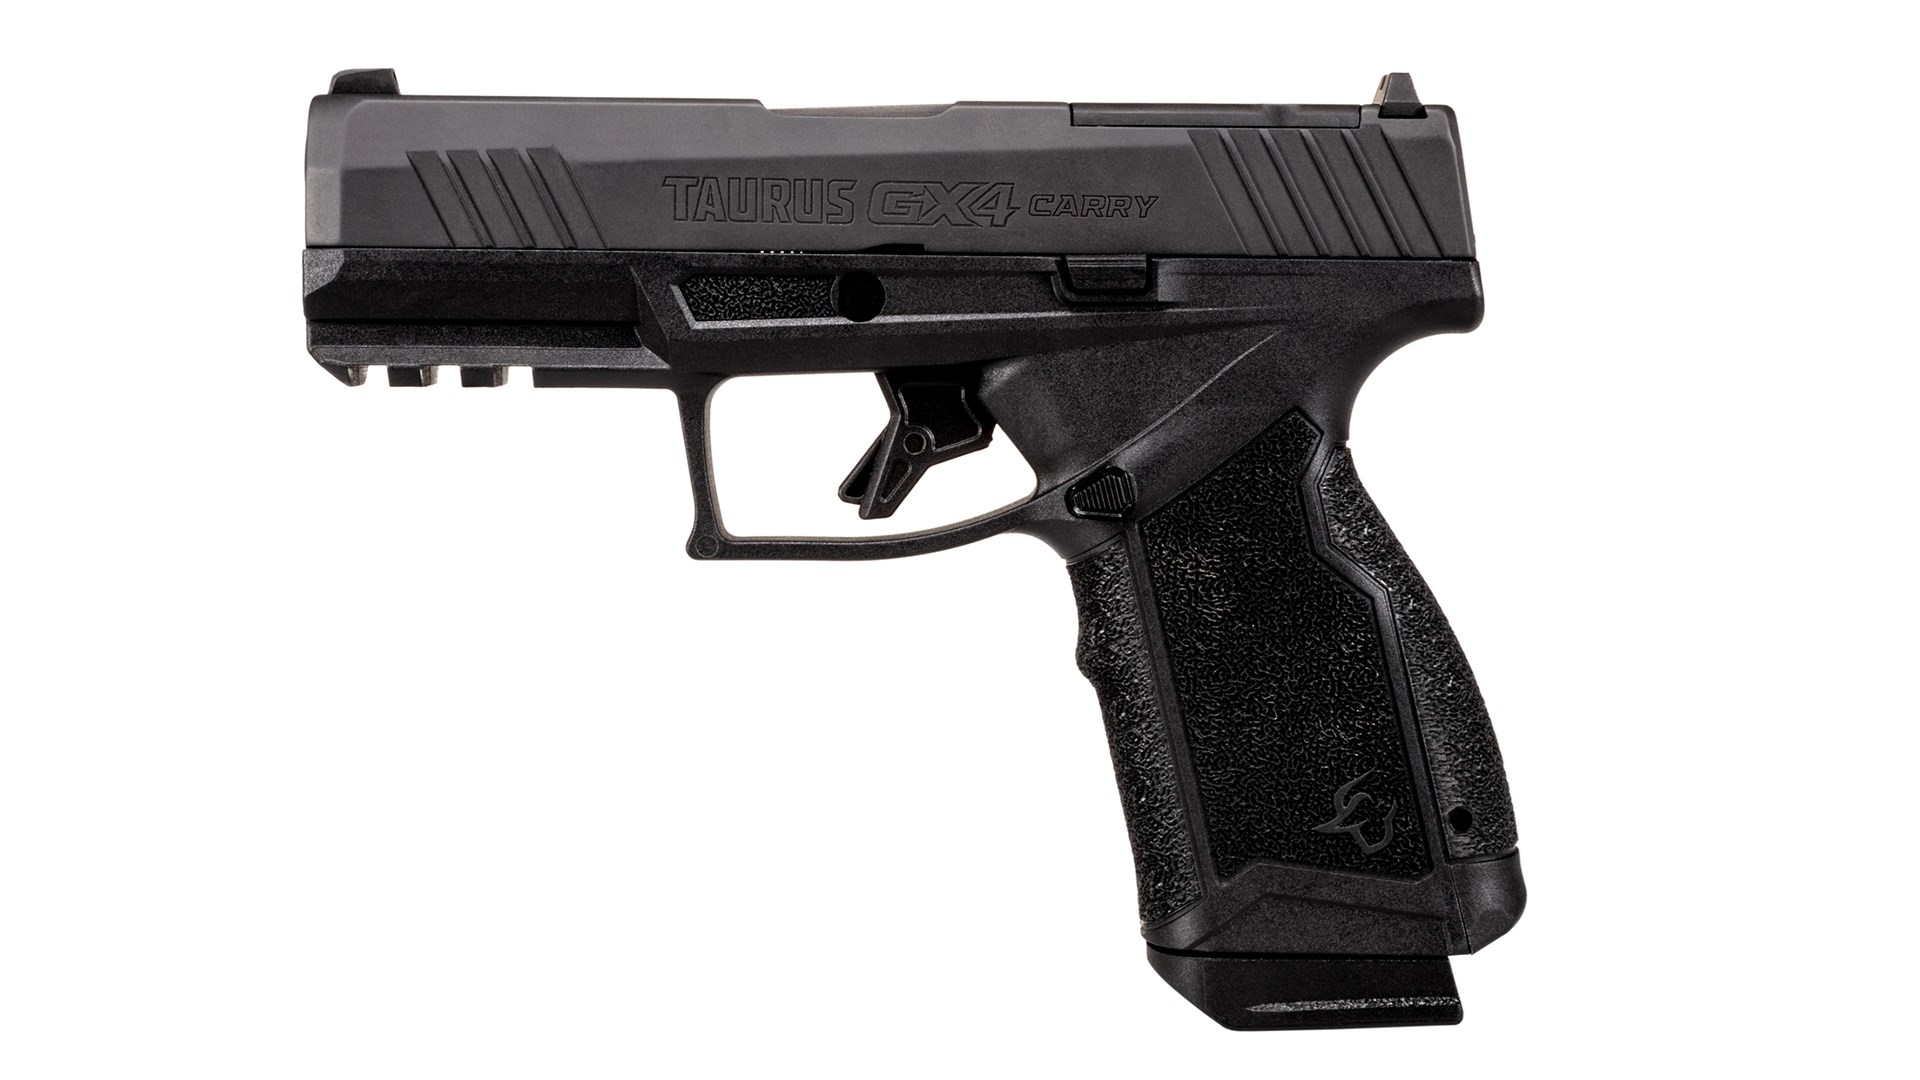 Left side of the all-black Taurus GX4 Carry pistol.